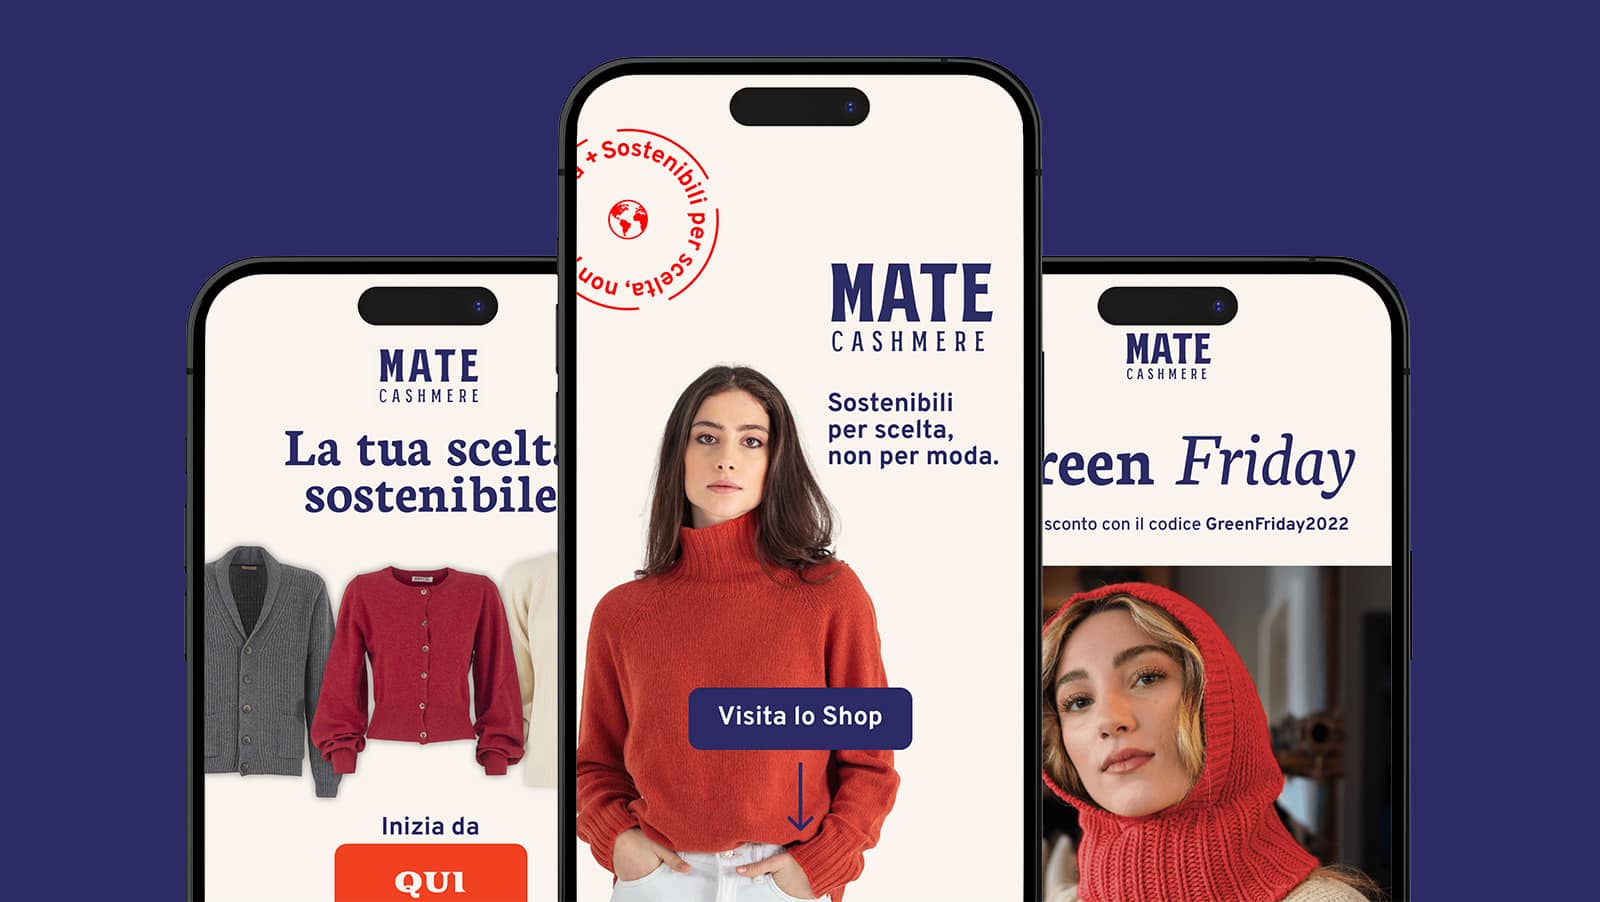 Mockup Advertising Campagne Mate Cashmere Case Study